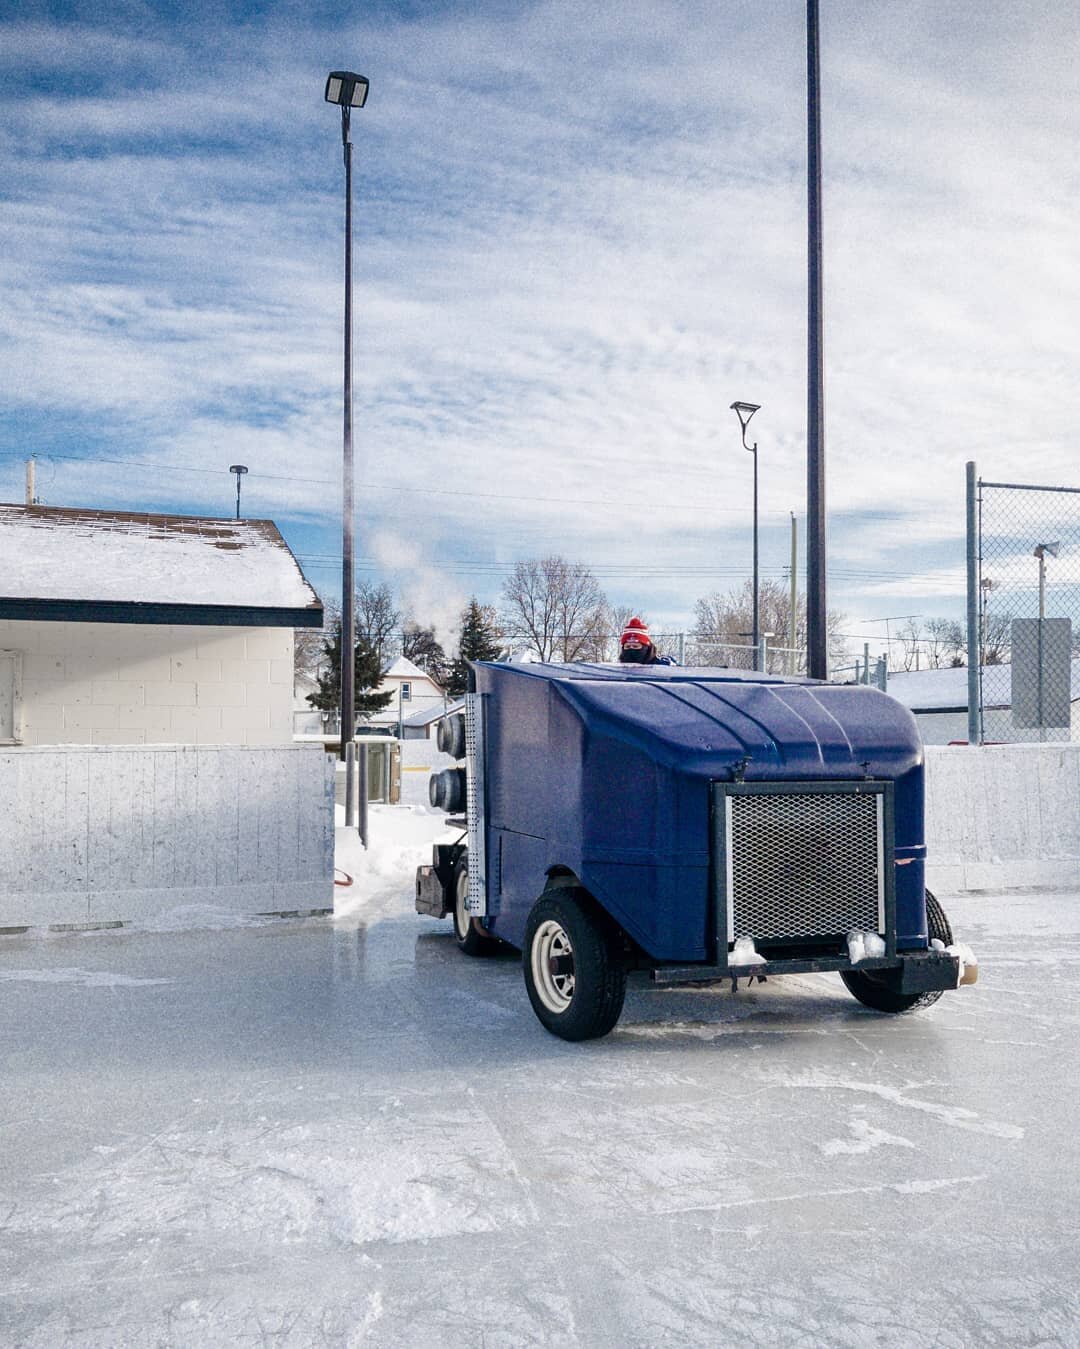 Is Zamboni time stressful or relaxing?⁣
⁣
When the Zamboni gets on the ice I take it as a nice time to have a small rest but some people seem frustrated with having to take the time to clean the surface. The fresh clean ice is so nice. Maybe it's wor